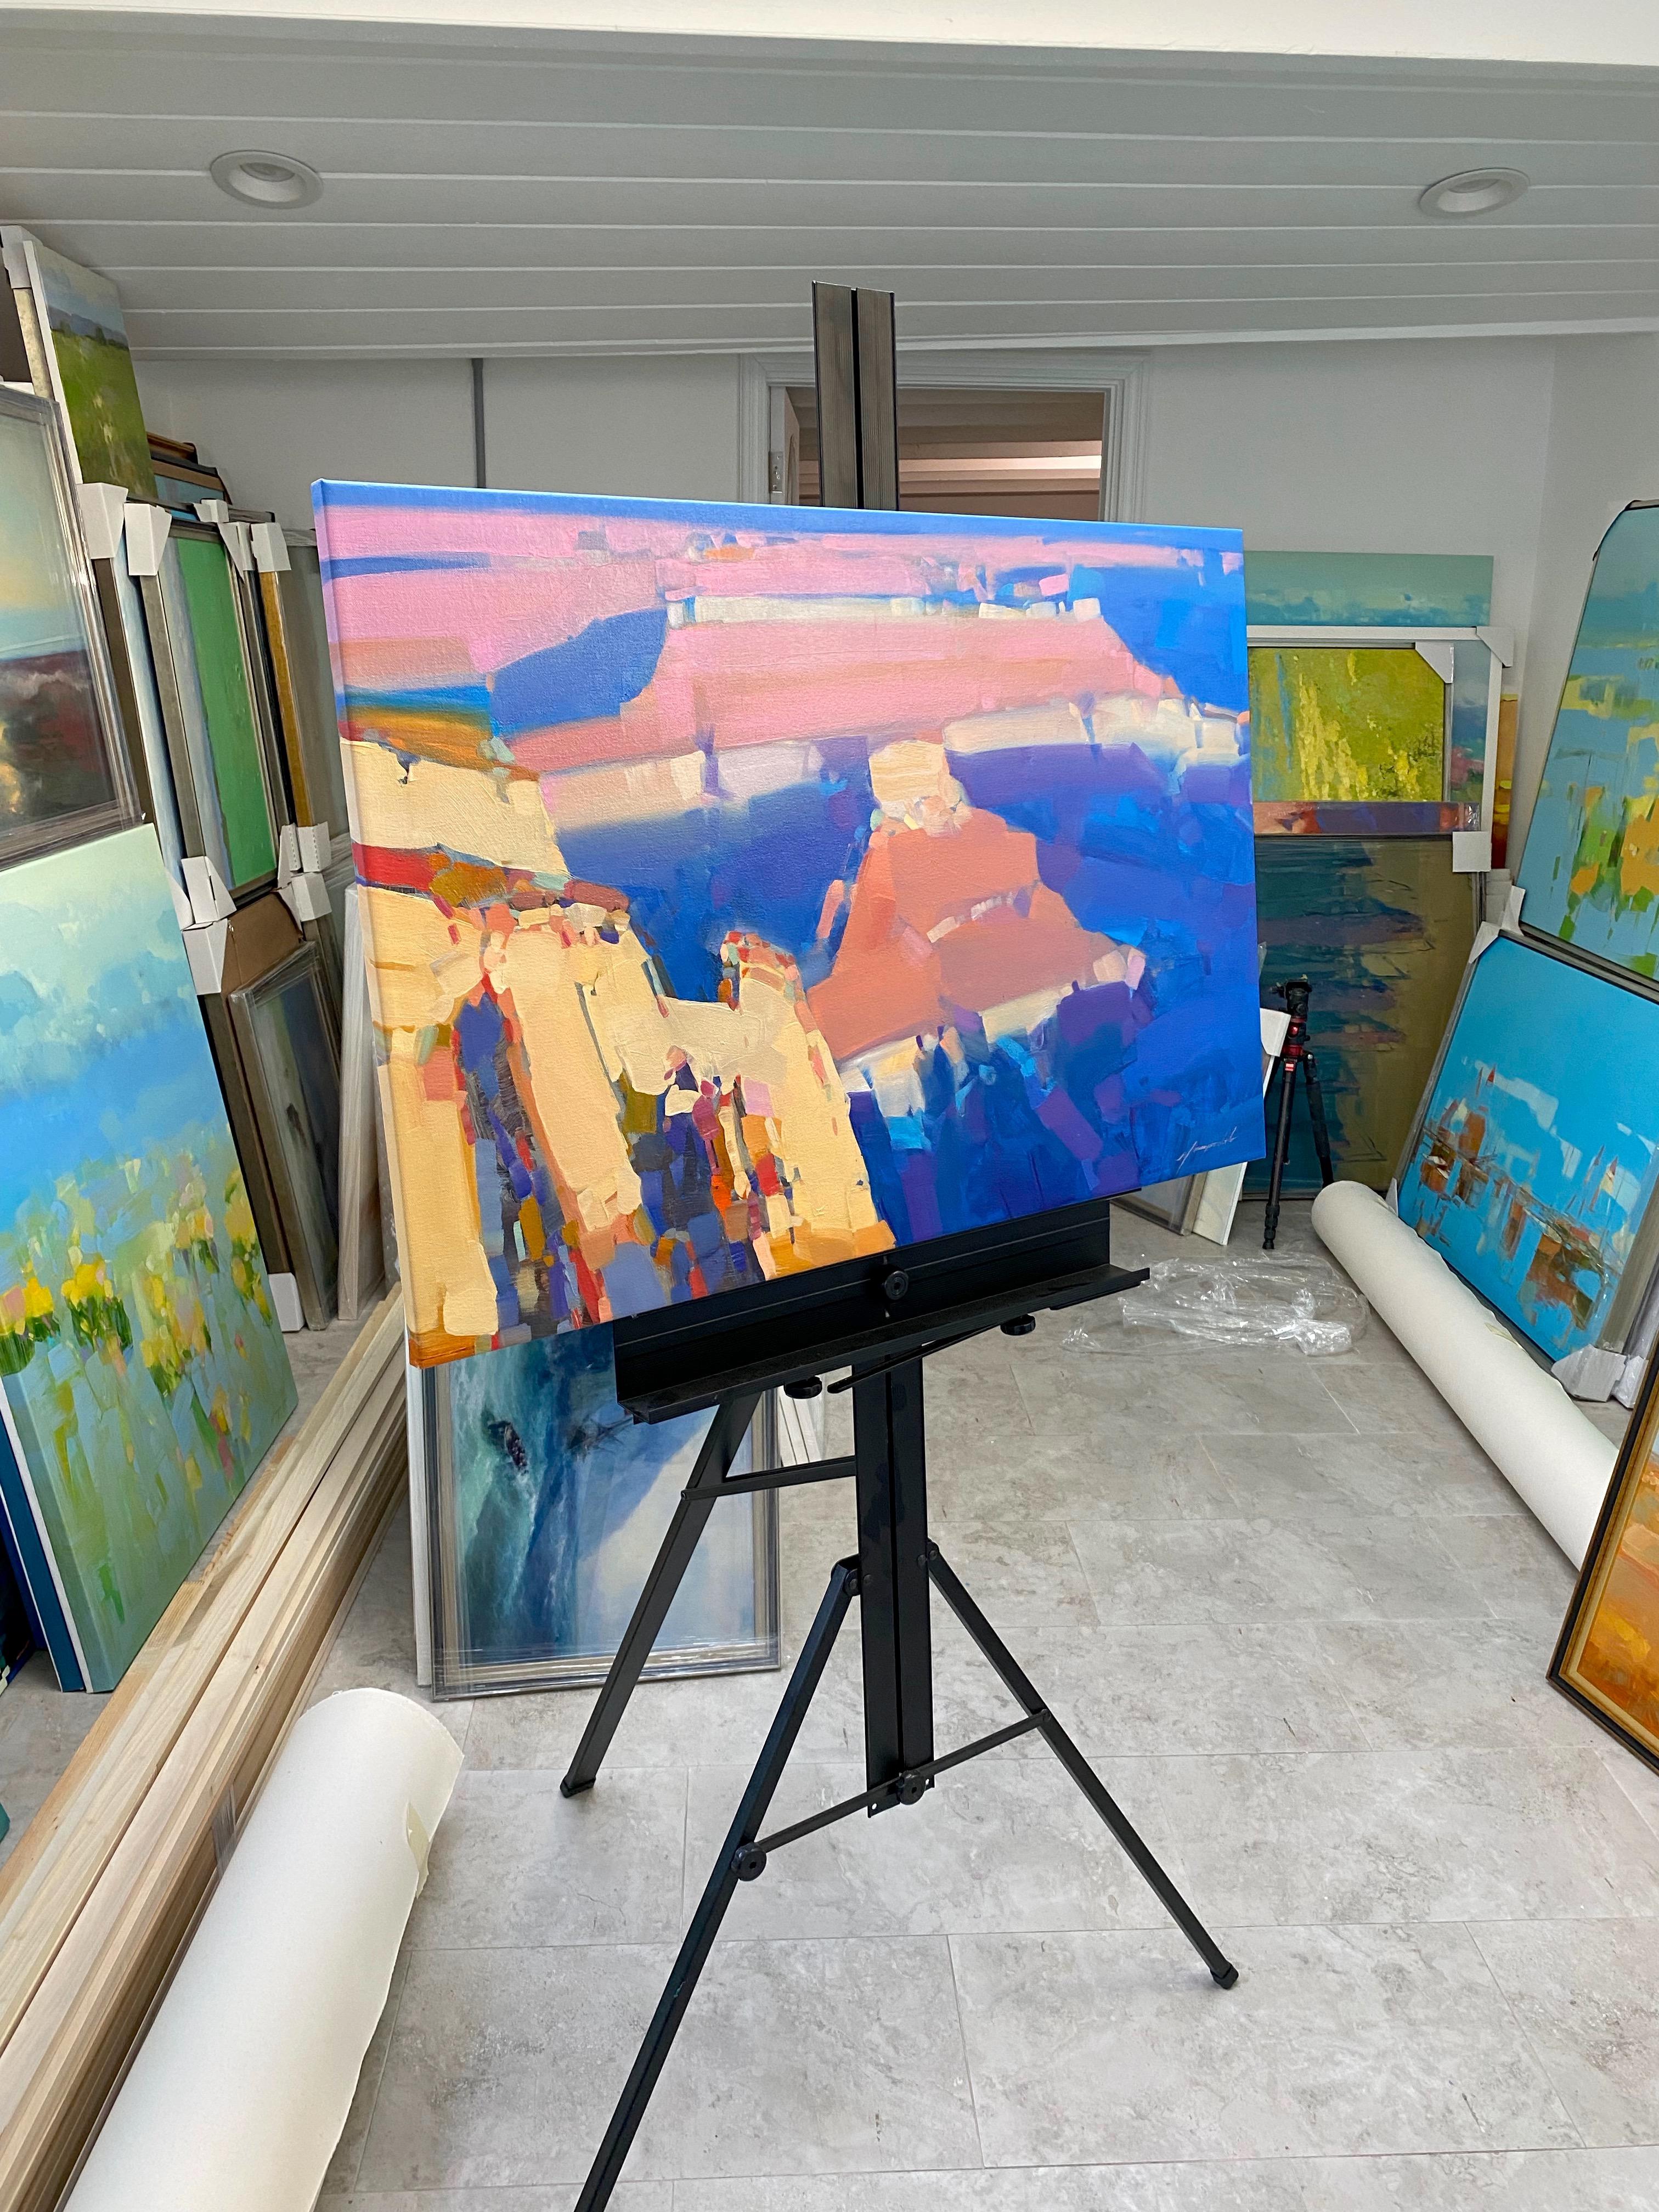 Artist: Vahe Yeremyan 
Work: Original Oil Painting, Handmade Artwork, One of a Kind 
Medium: Oil on Canvas 
Year: 2019
Style: Impressionism, 
Subject: Canyon Sunset,
Size: 23